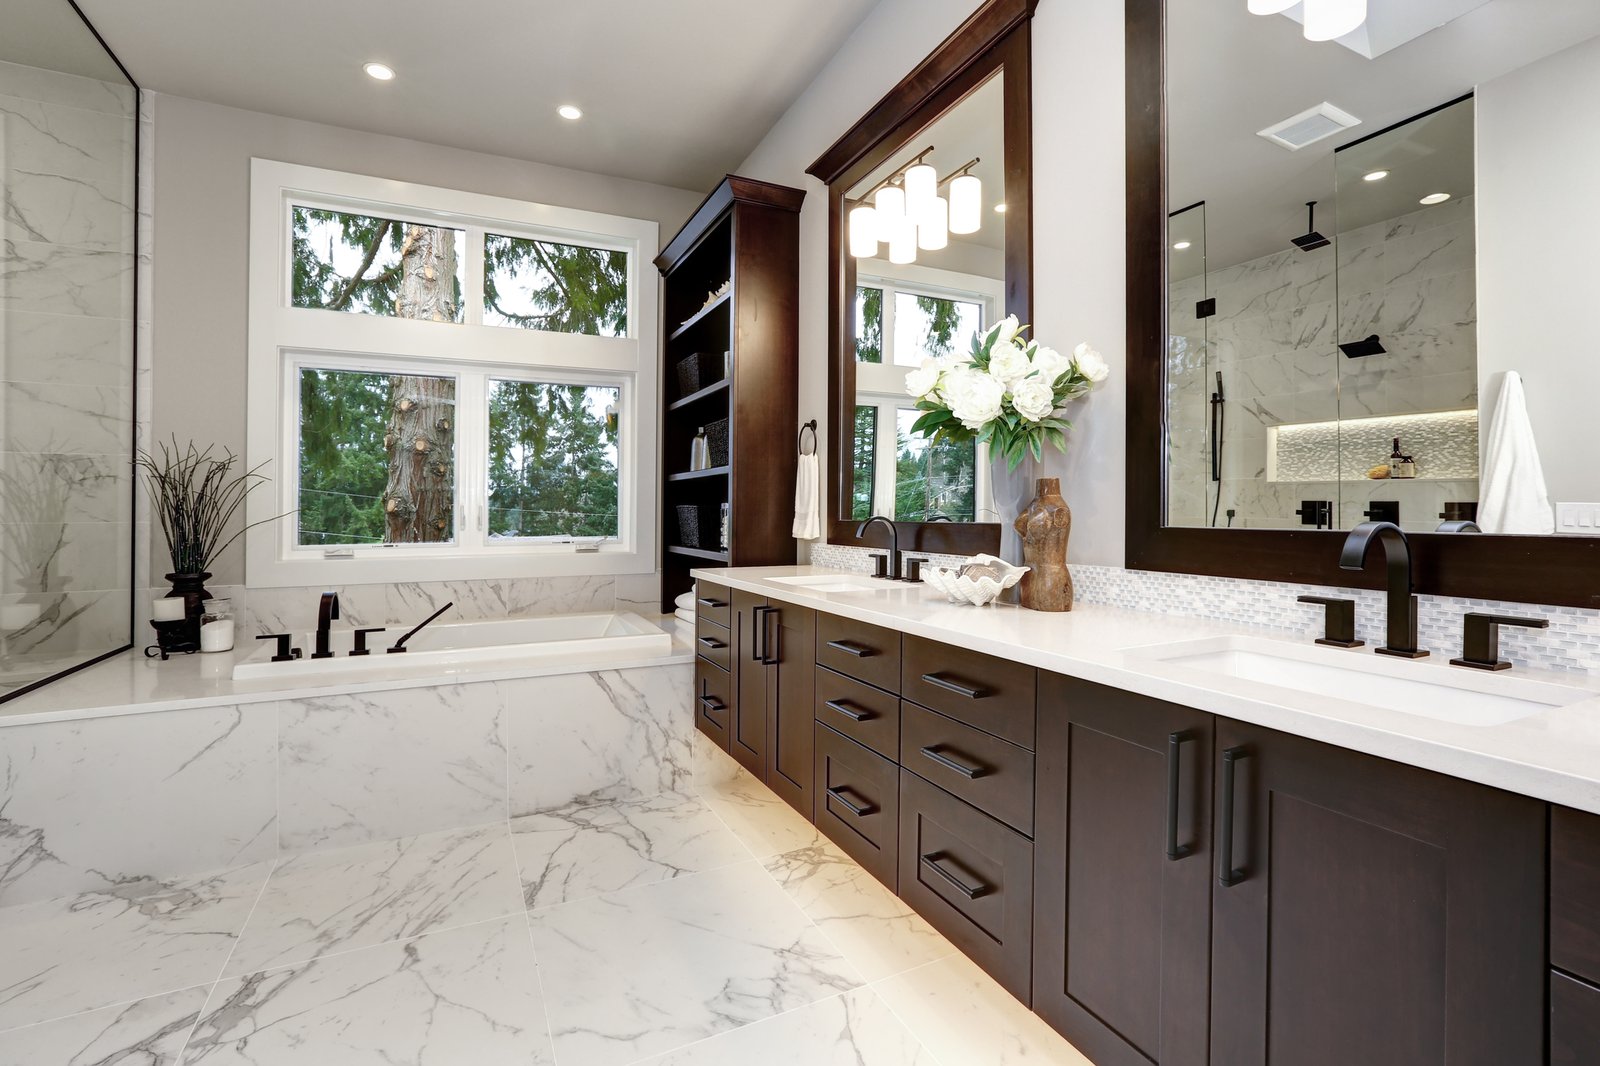 Beautiful bathroom with tile floors and marble countertop.